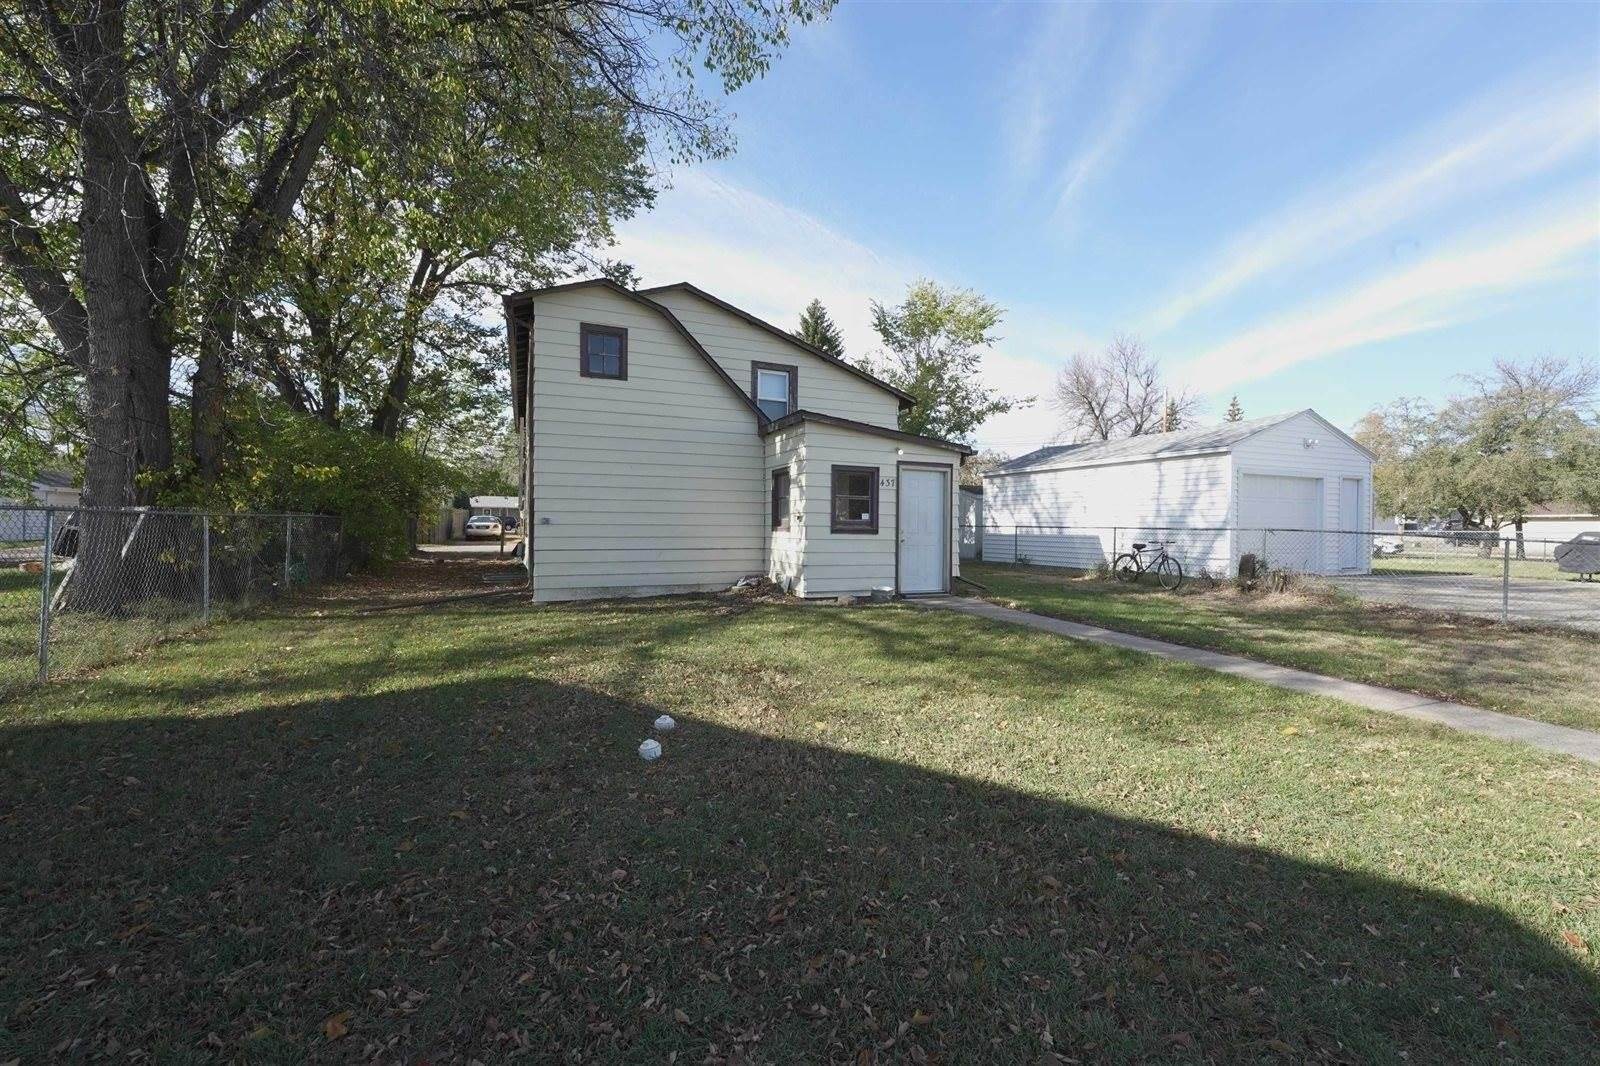 437 NW 19th St, Minot, ND 58703